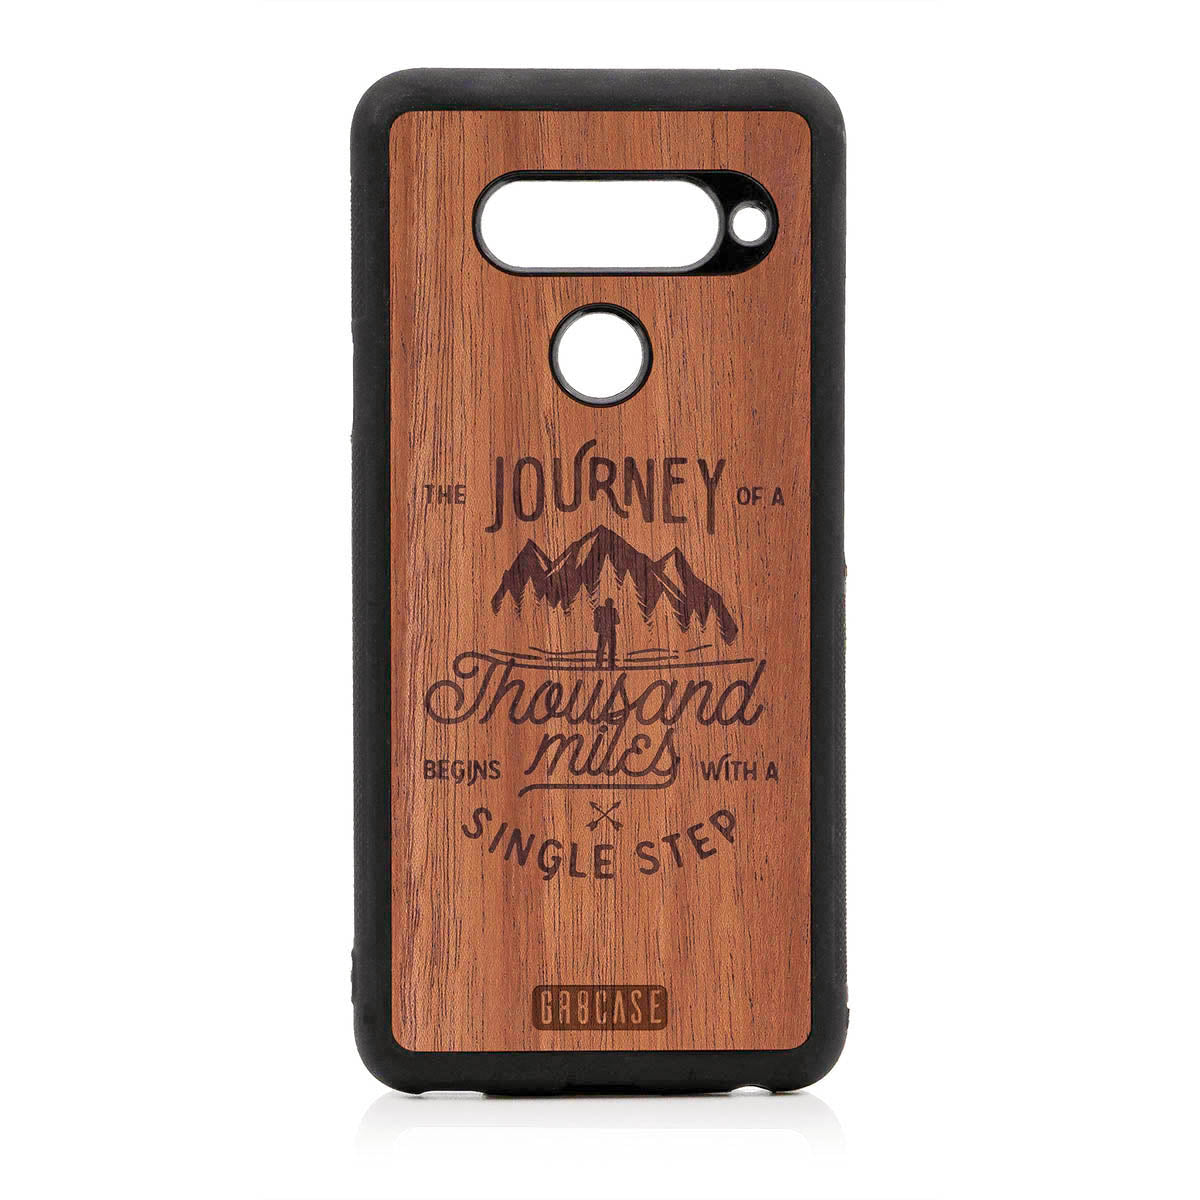 The Journey Of A Thousand Miles Begins With A Single Step Design Wood Case For LG V40